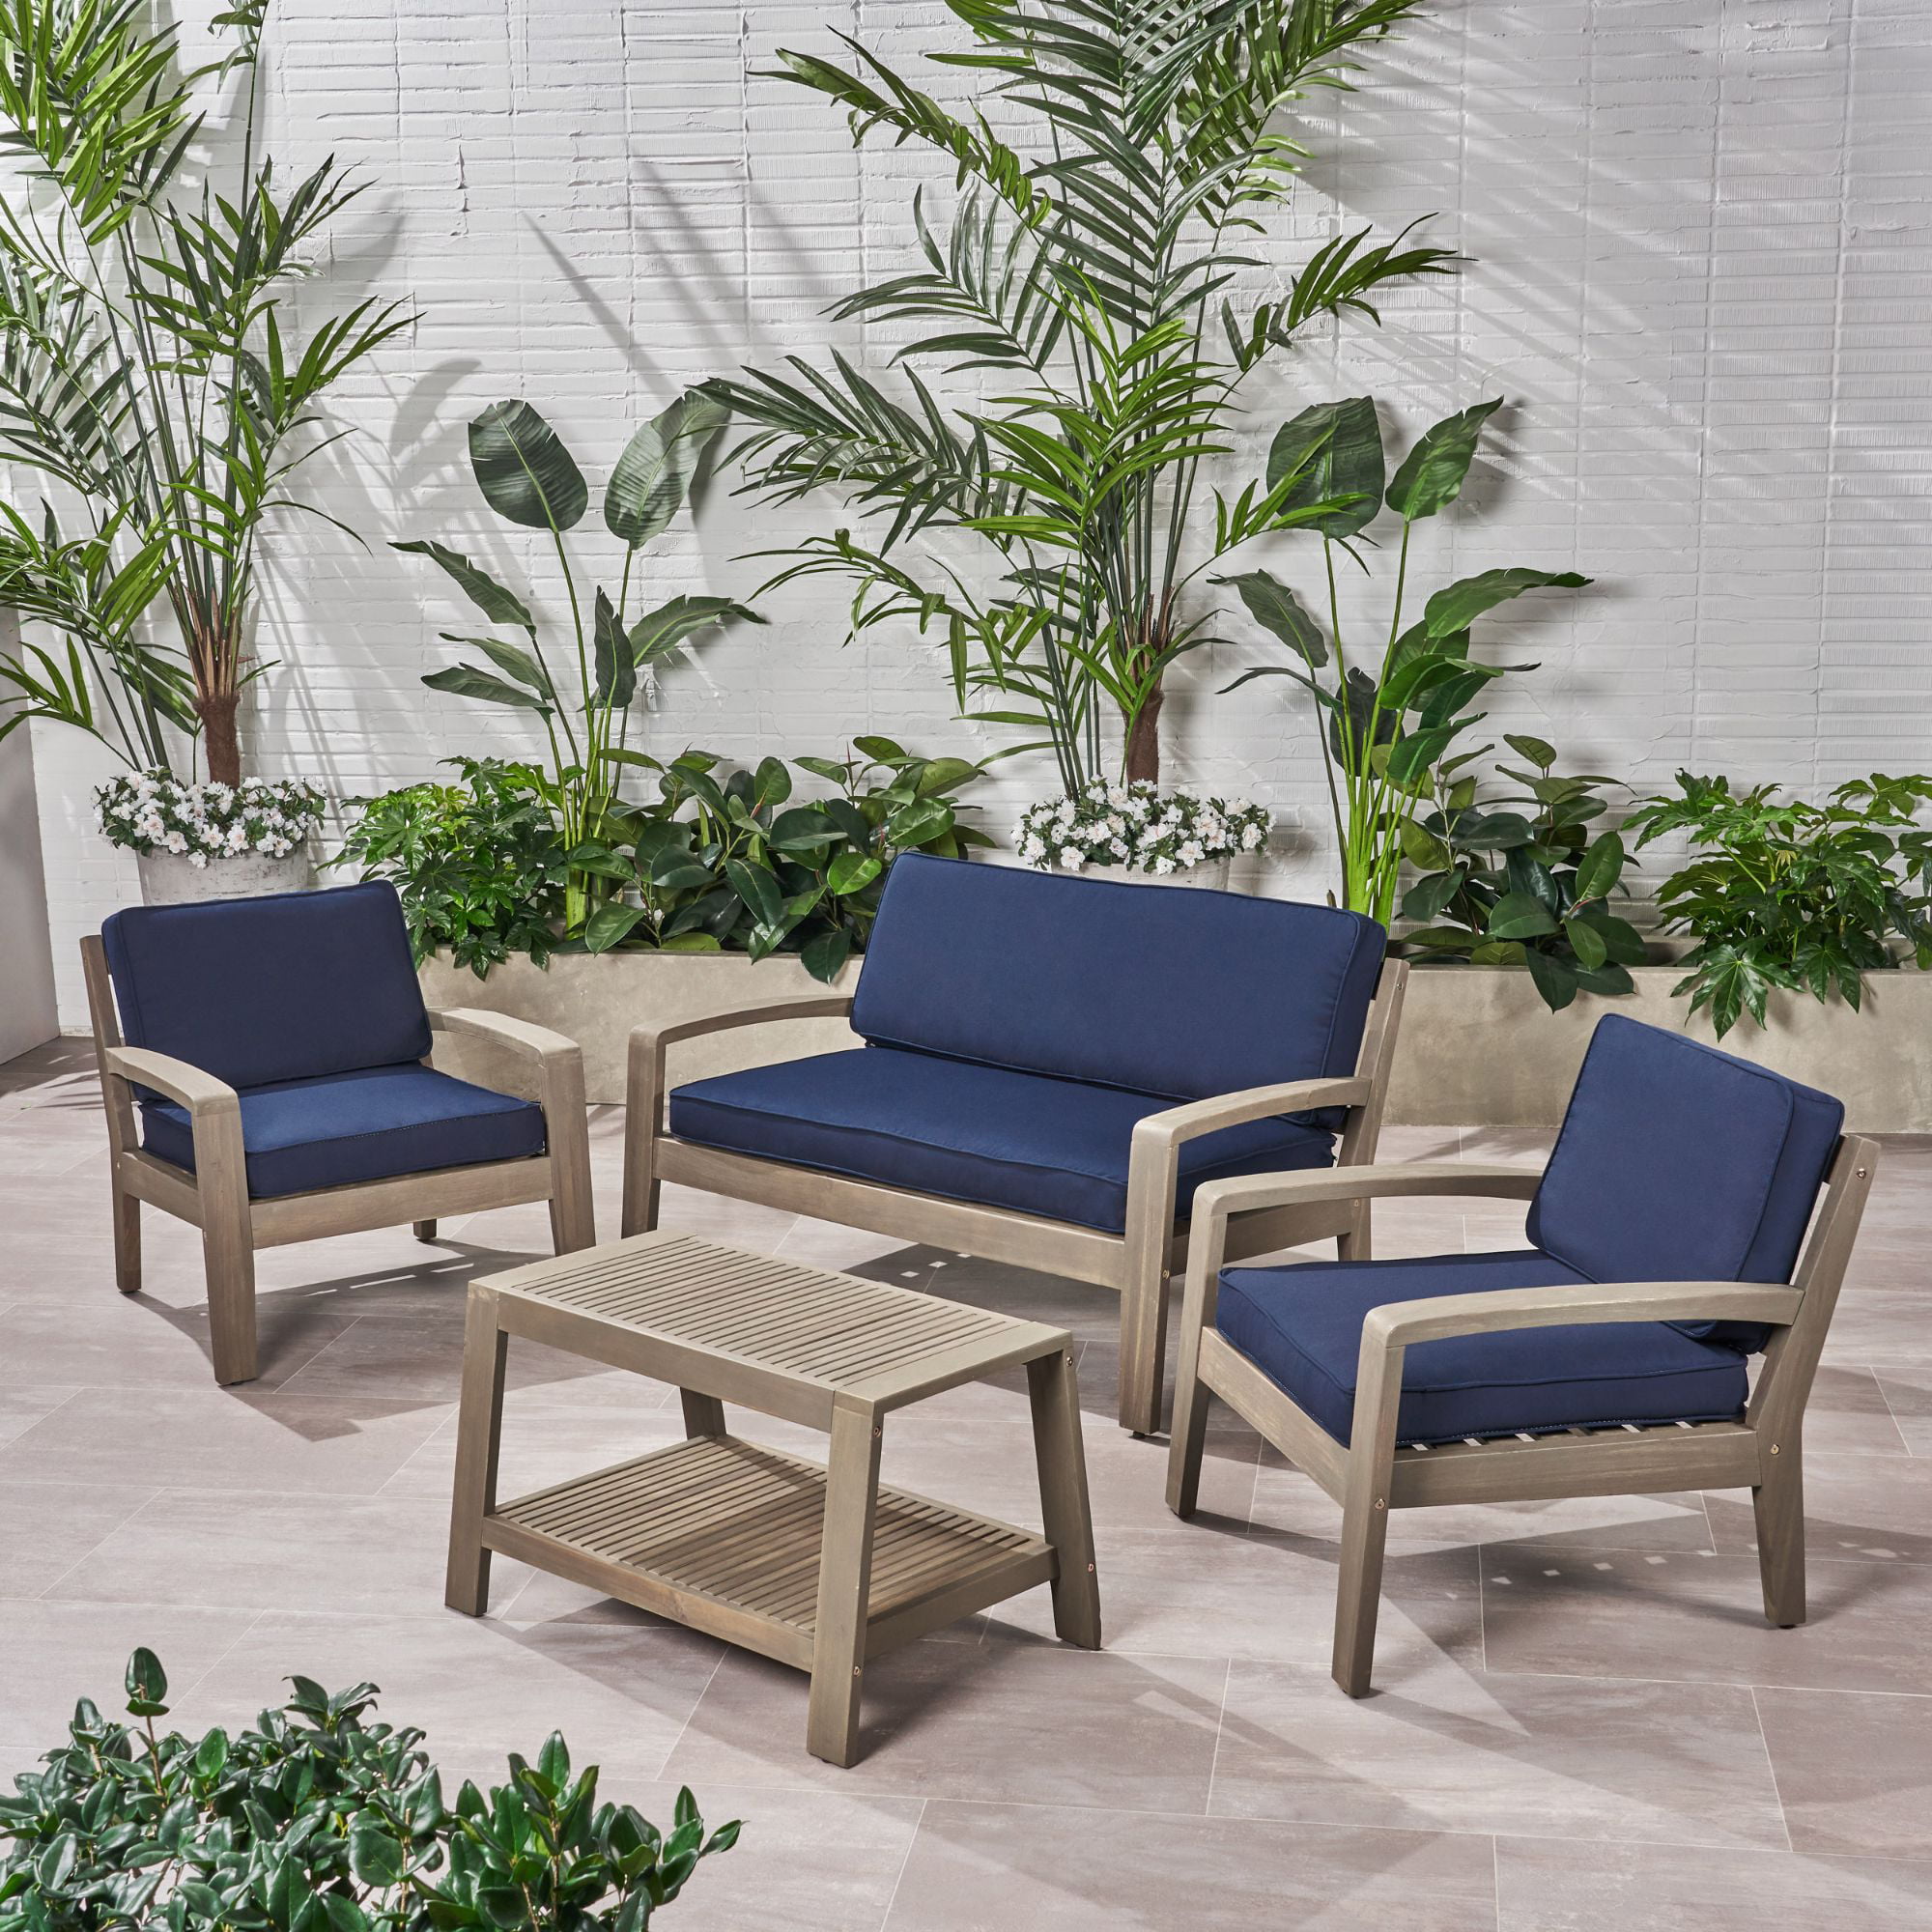 Get All Your Wholesale Outdoor Furniture Needs From Indonesia